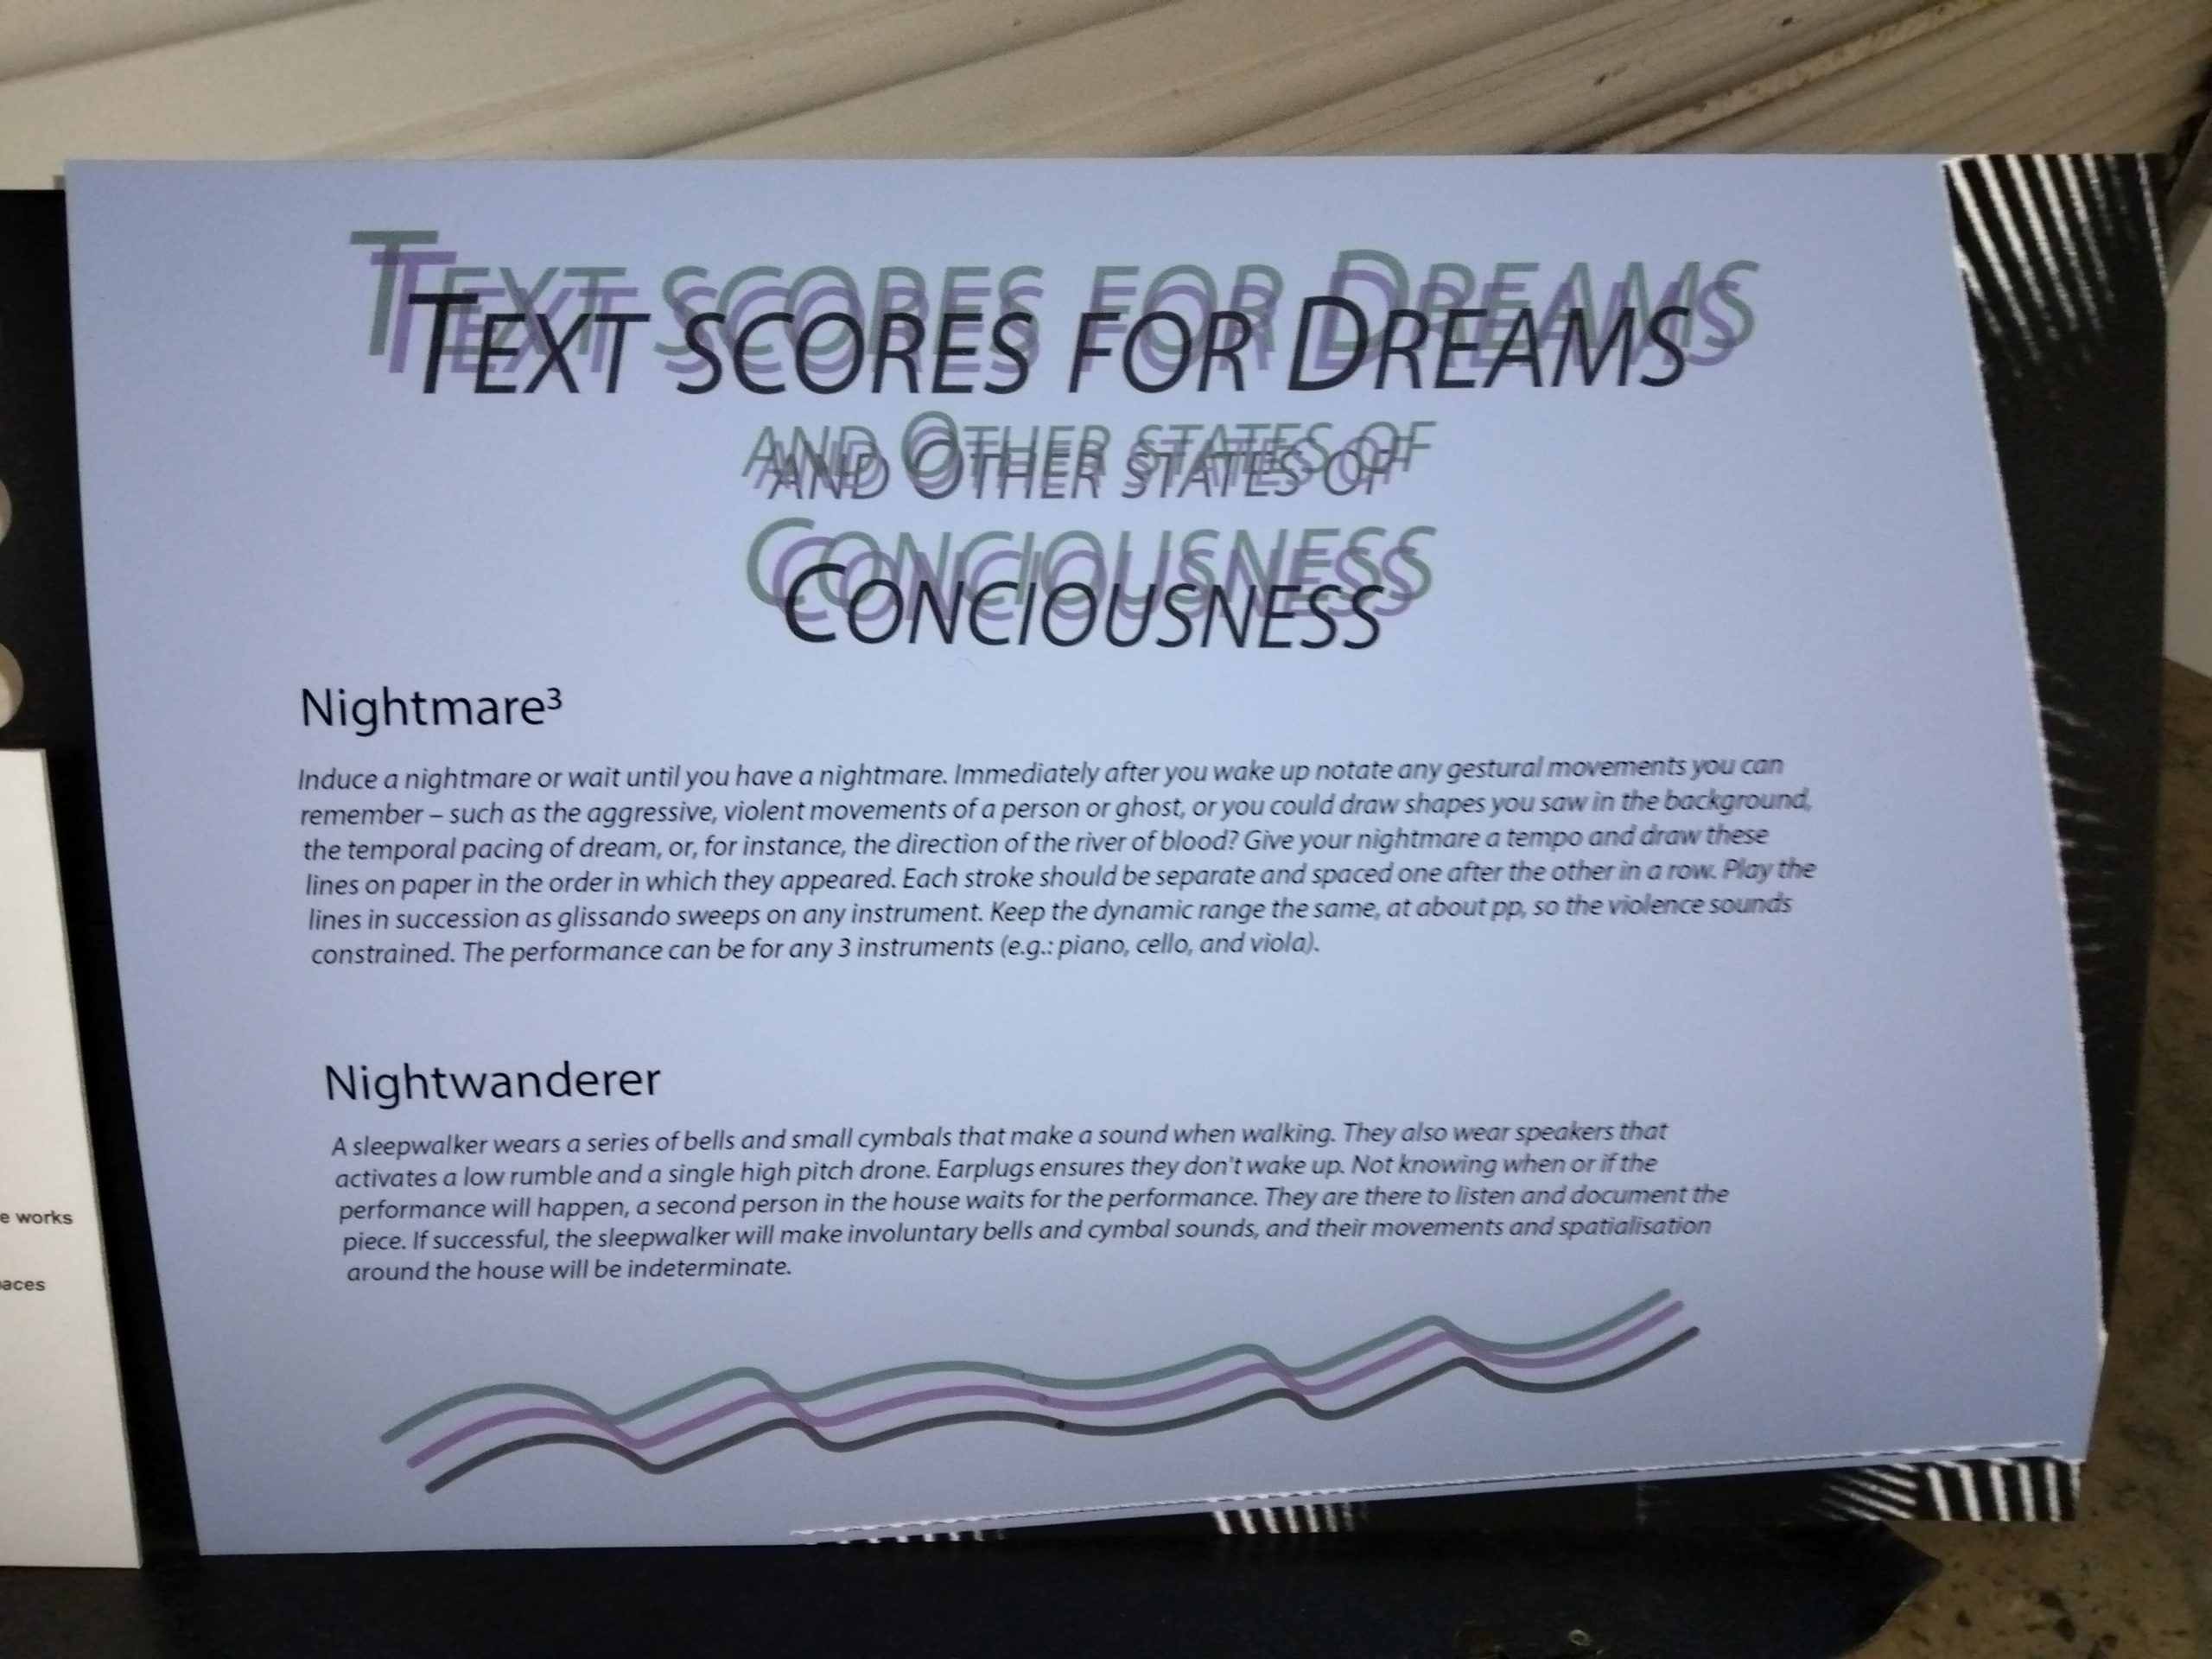 Text score for dreams and other states